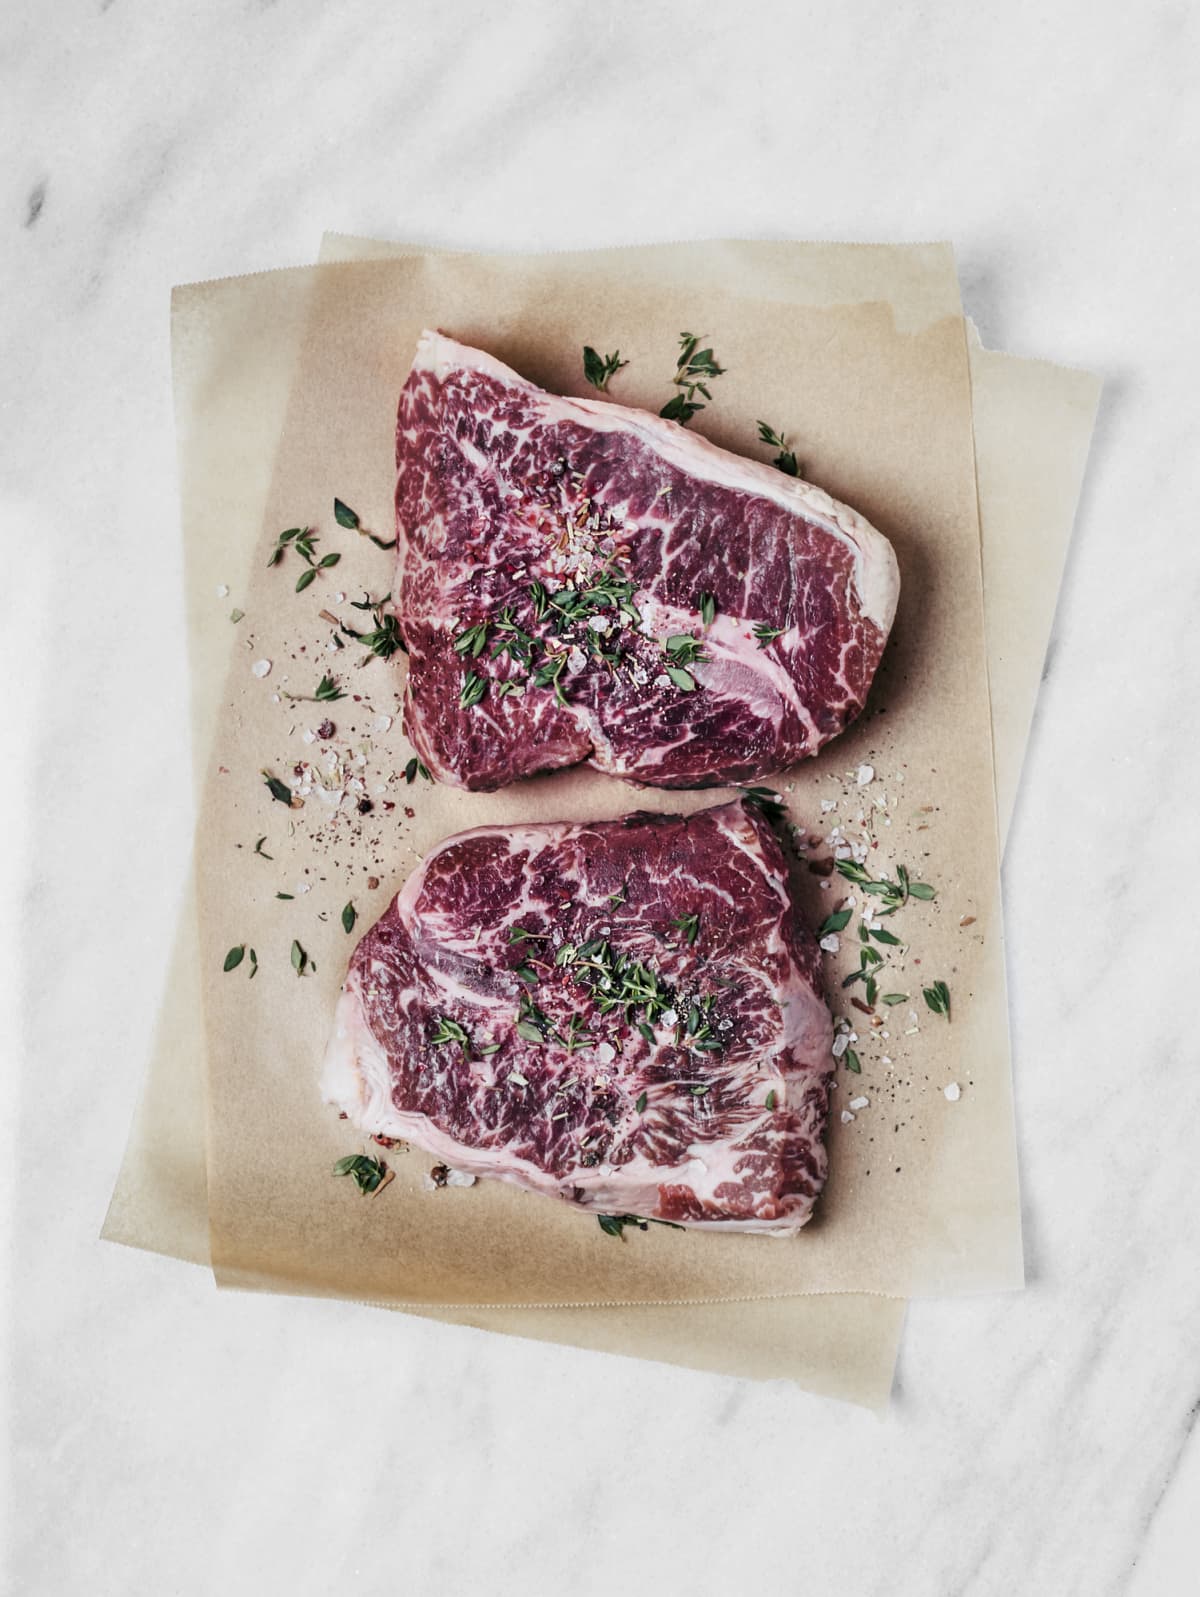 Two raw steaks with herbs on parchment paper